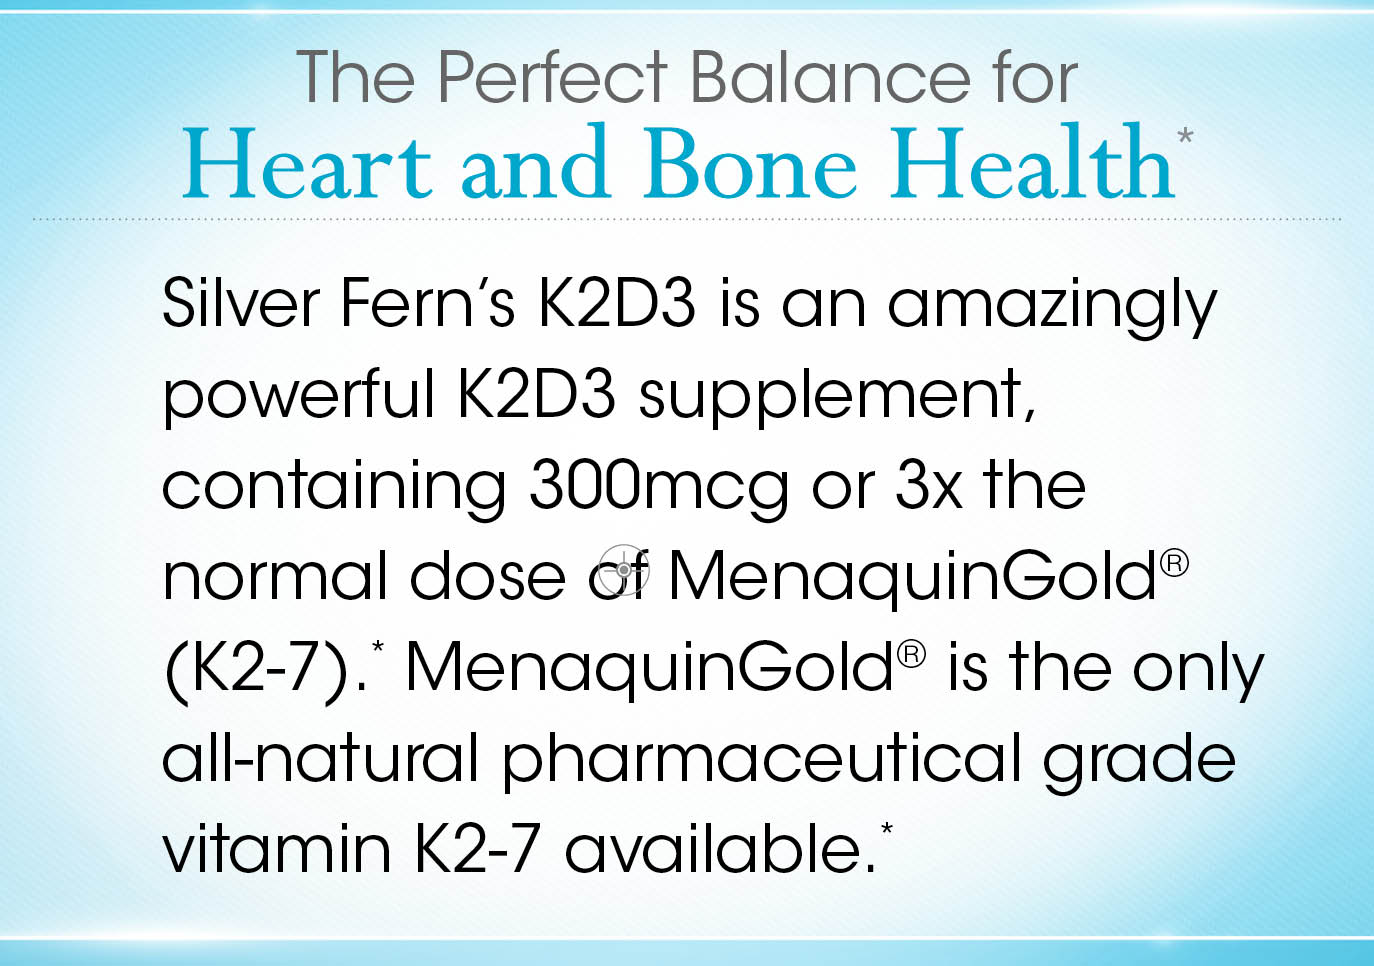 K2-D3 - Bone and Heart Support